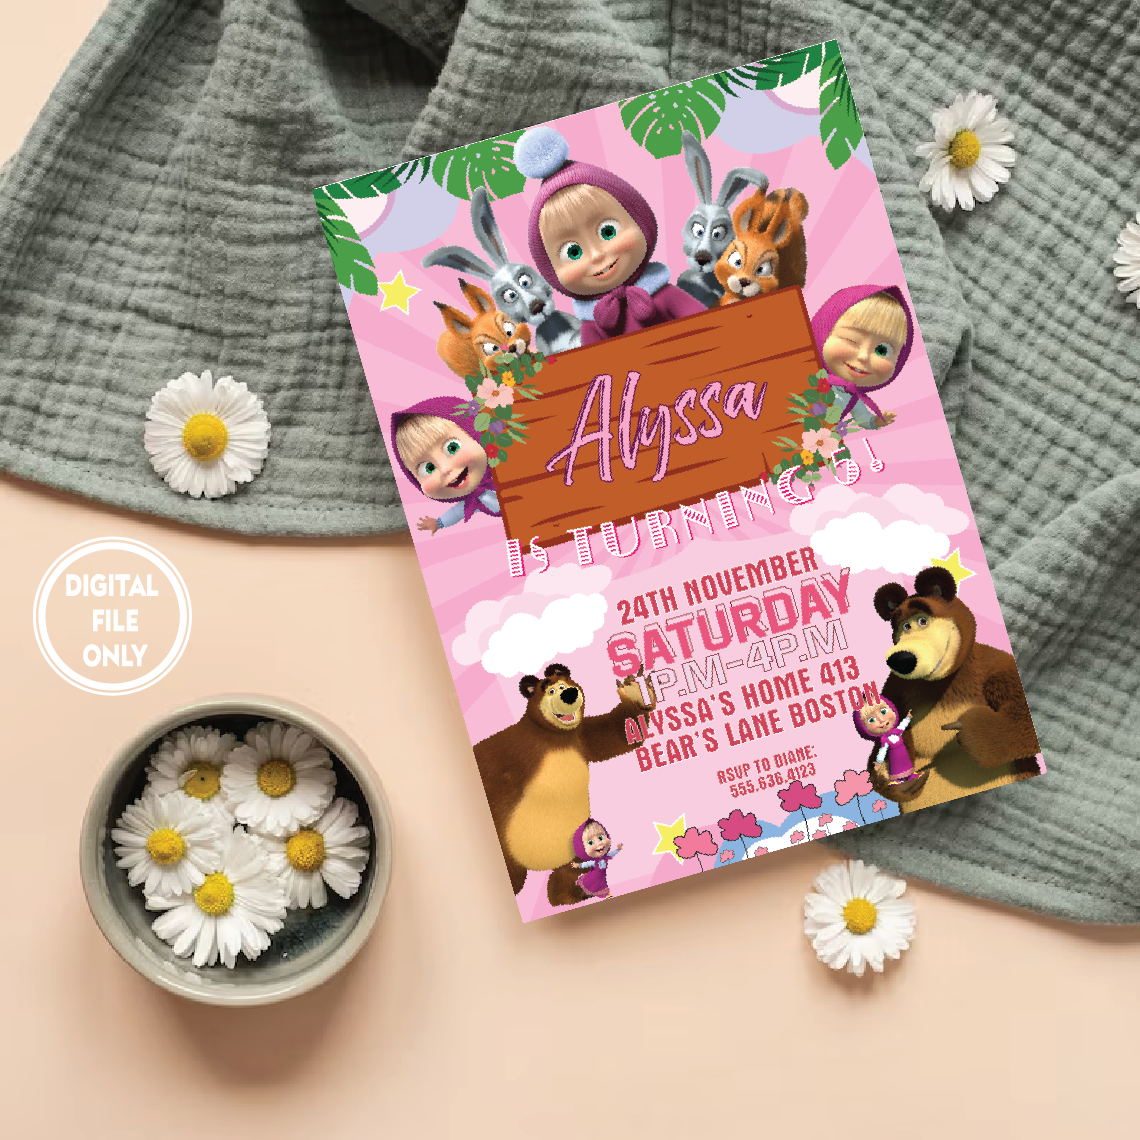 Personalized File Masha and The Bear Invitation for Girls Birthday Party Invitation for Masha Birthday Bear Invite Digital Masha and Bear PNG File Only